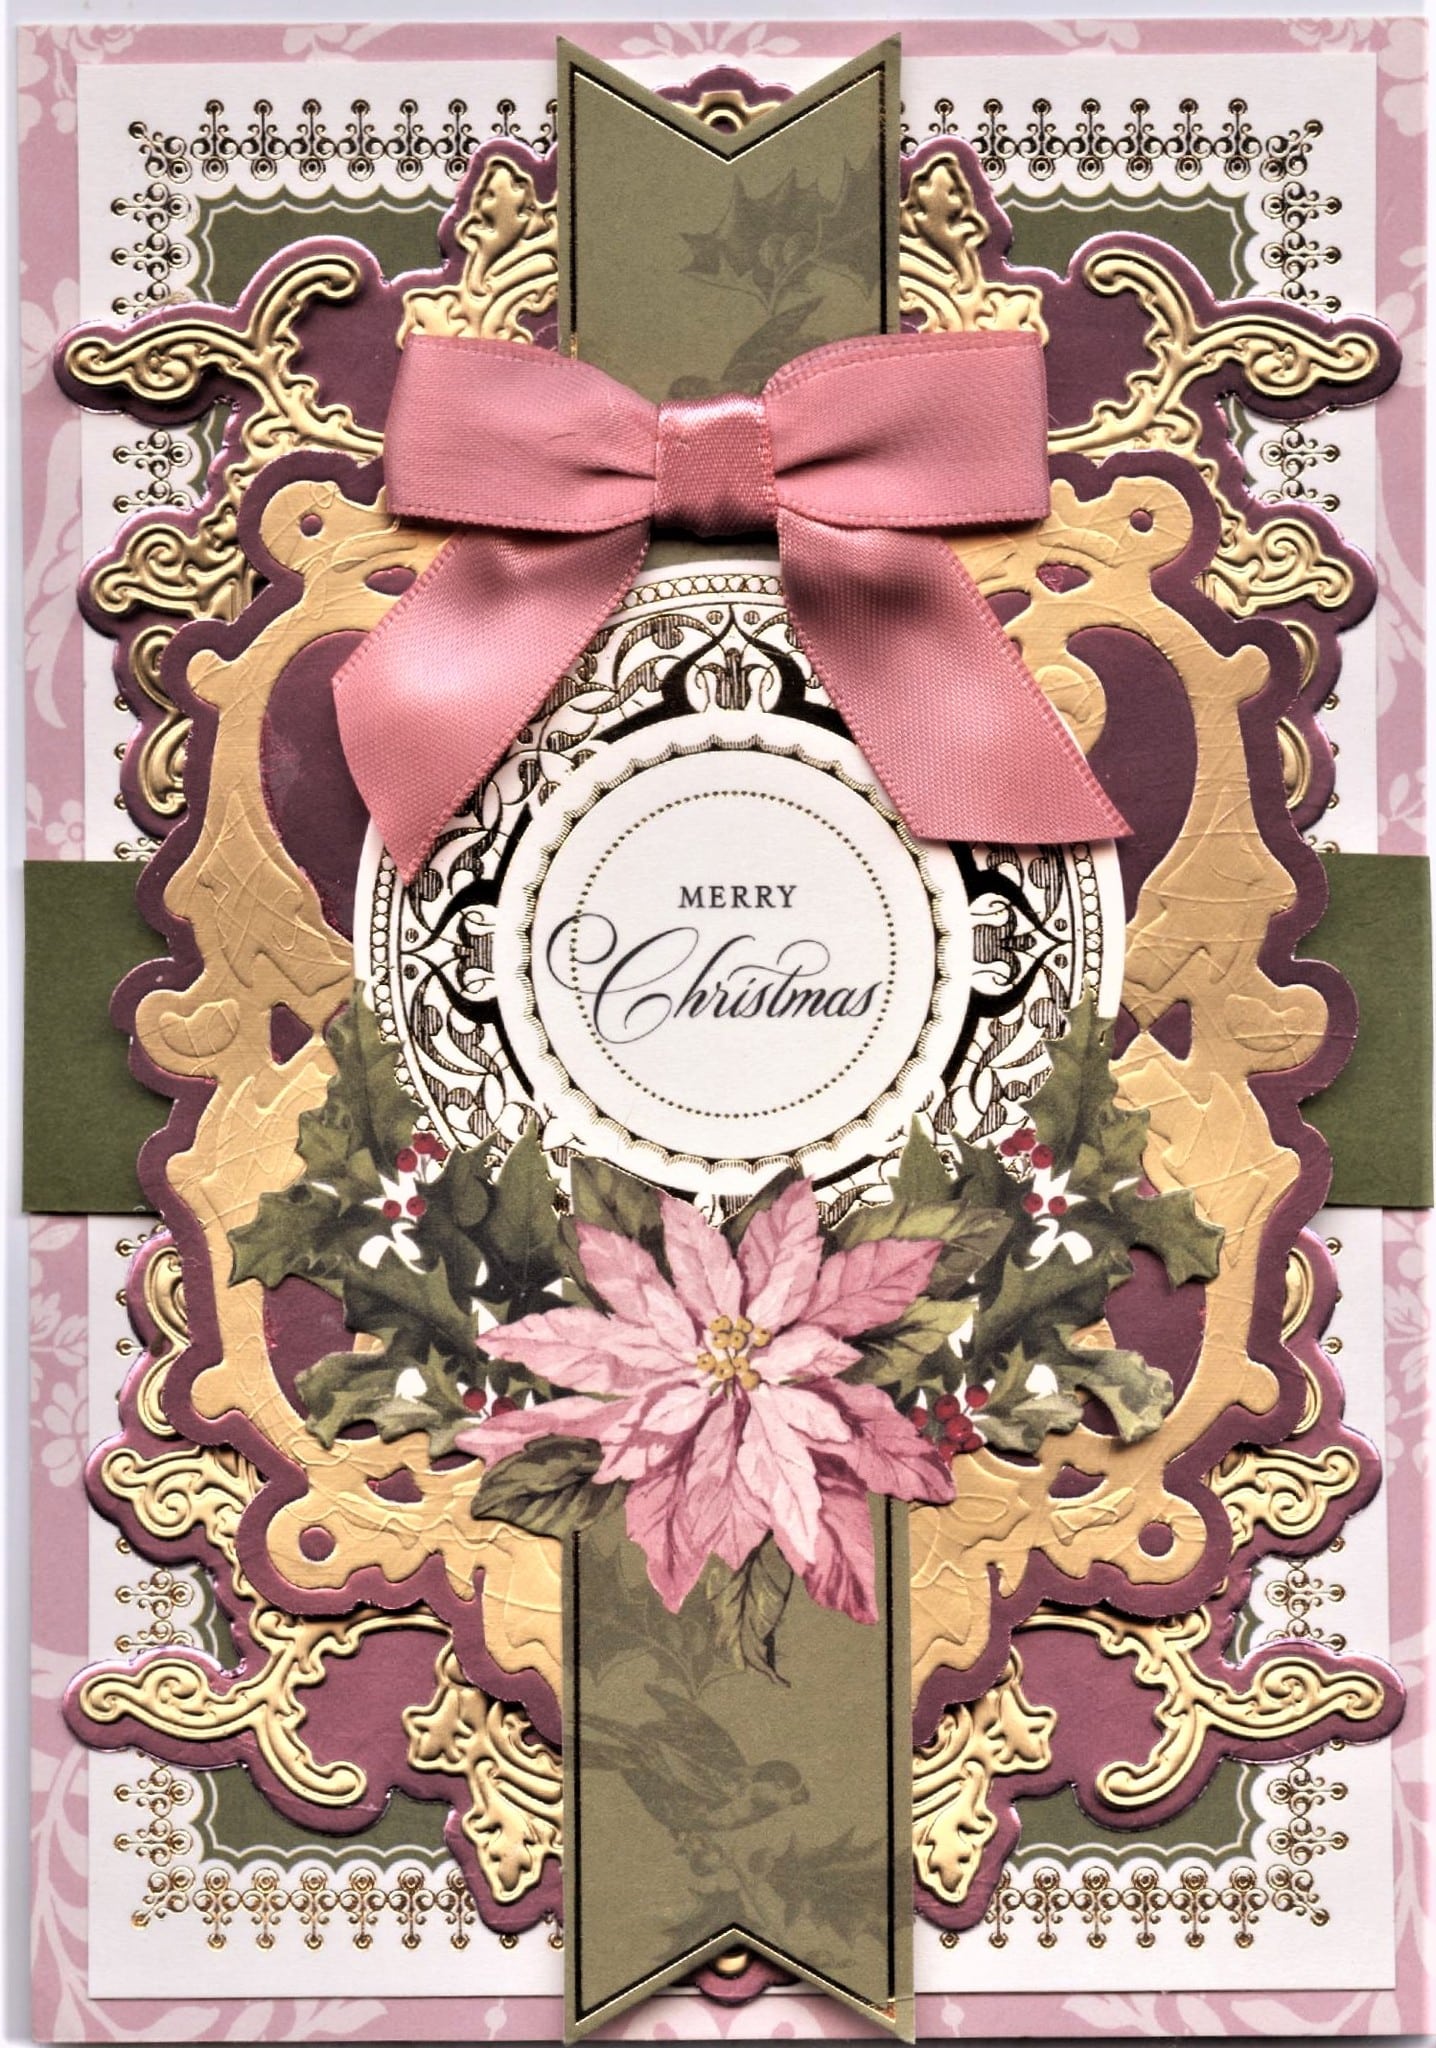 A christmas card with a bow and ornaments.